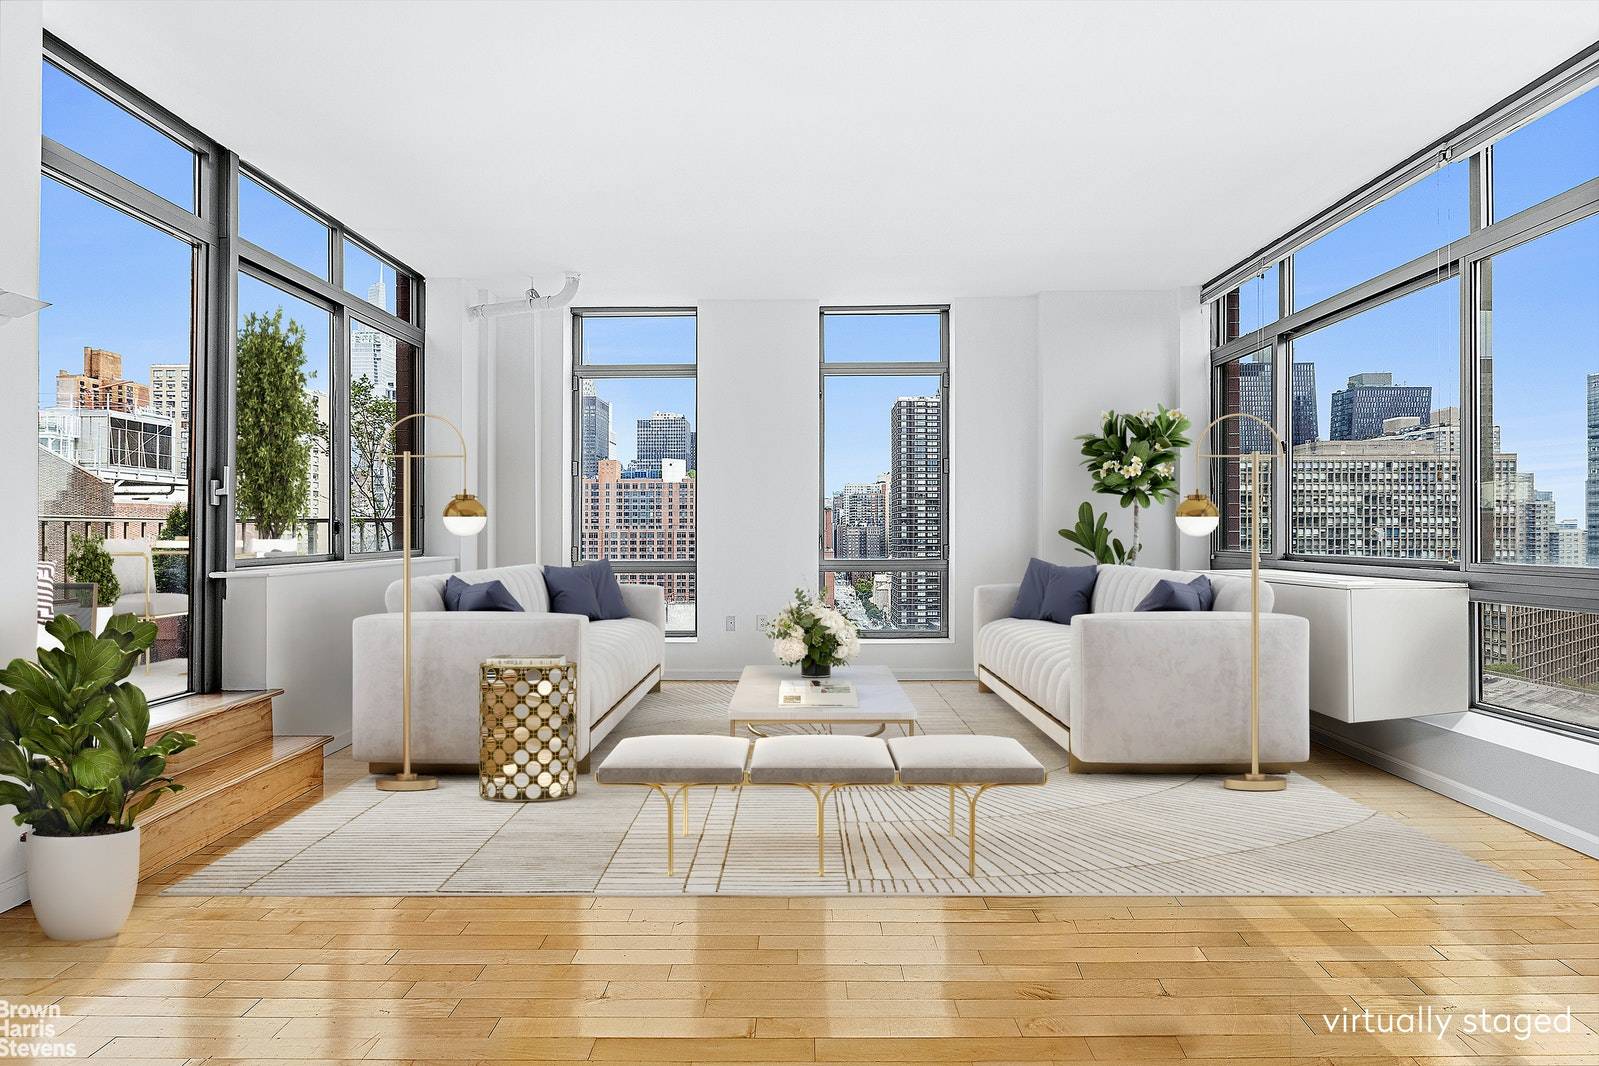 A trophy One bedroom, One and half bathroom with a stunning terrace amongst a sea of cookie cutter condominiums is for sale for the first time in 16 years at ...